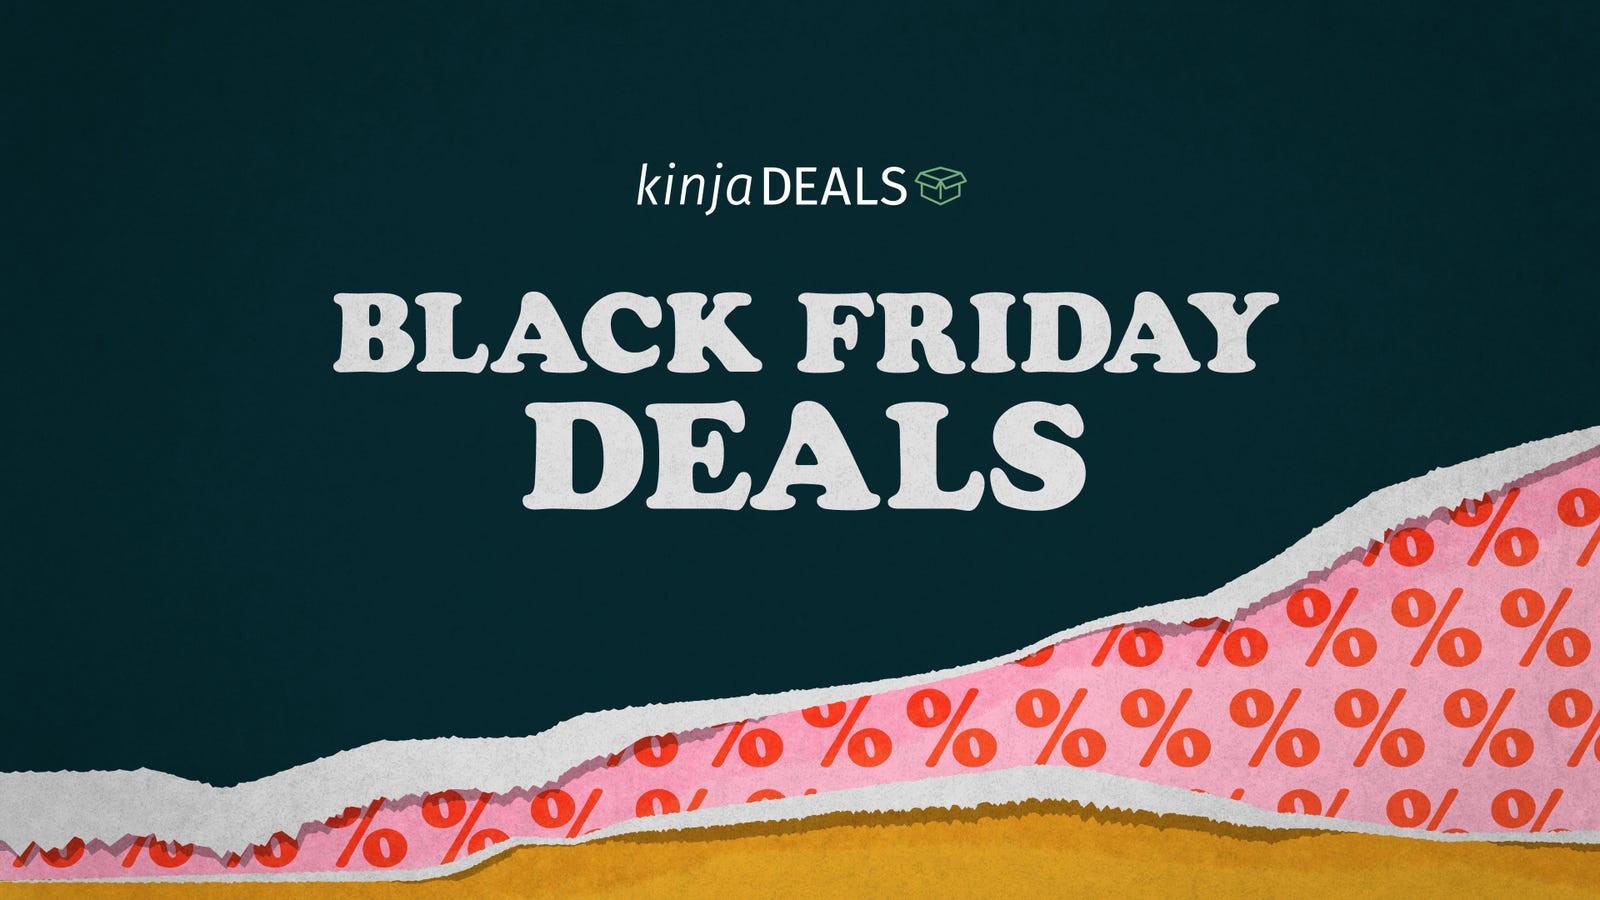 The 15 Best Black Friday Deals